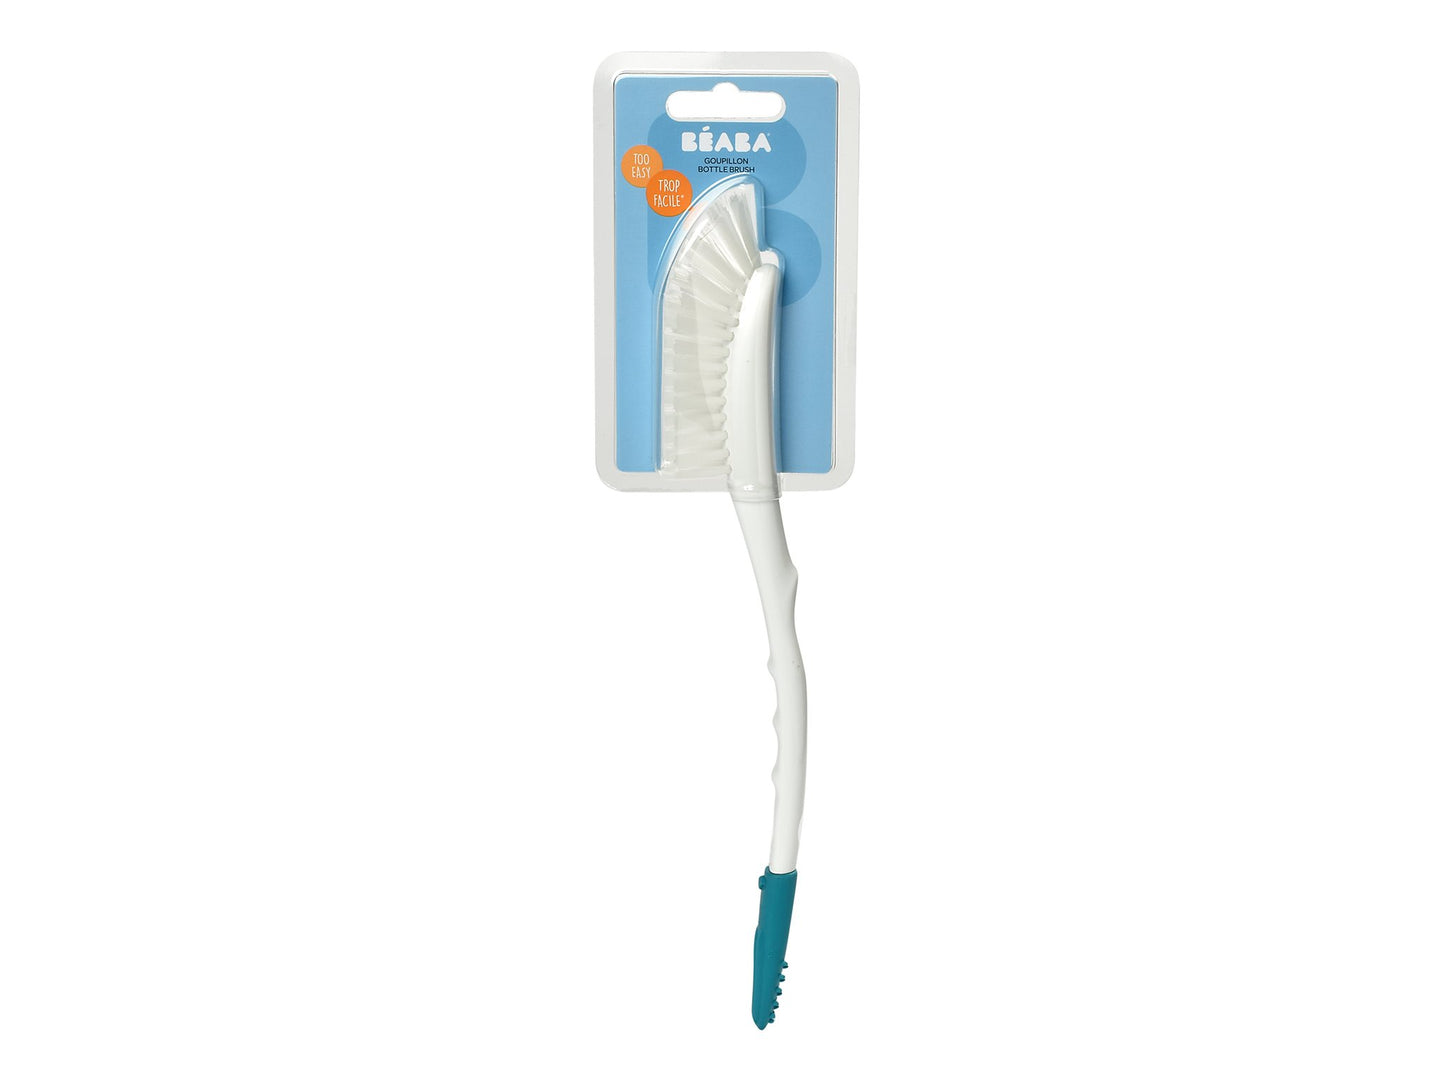 Beaba Simple Bottle Brush with Silicone Teat Cleaner